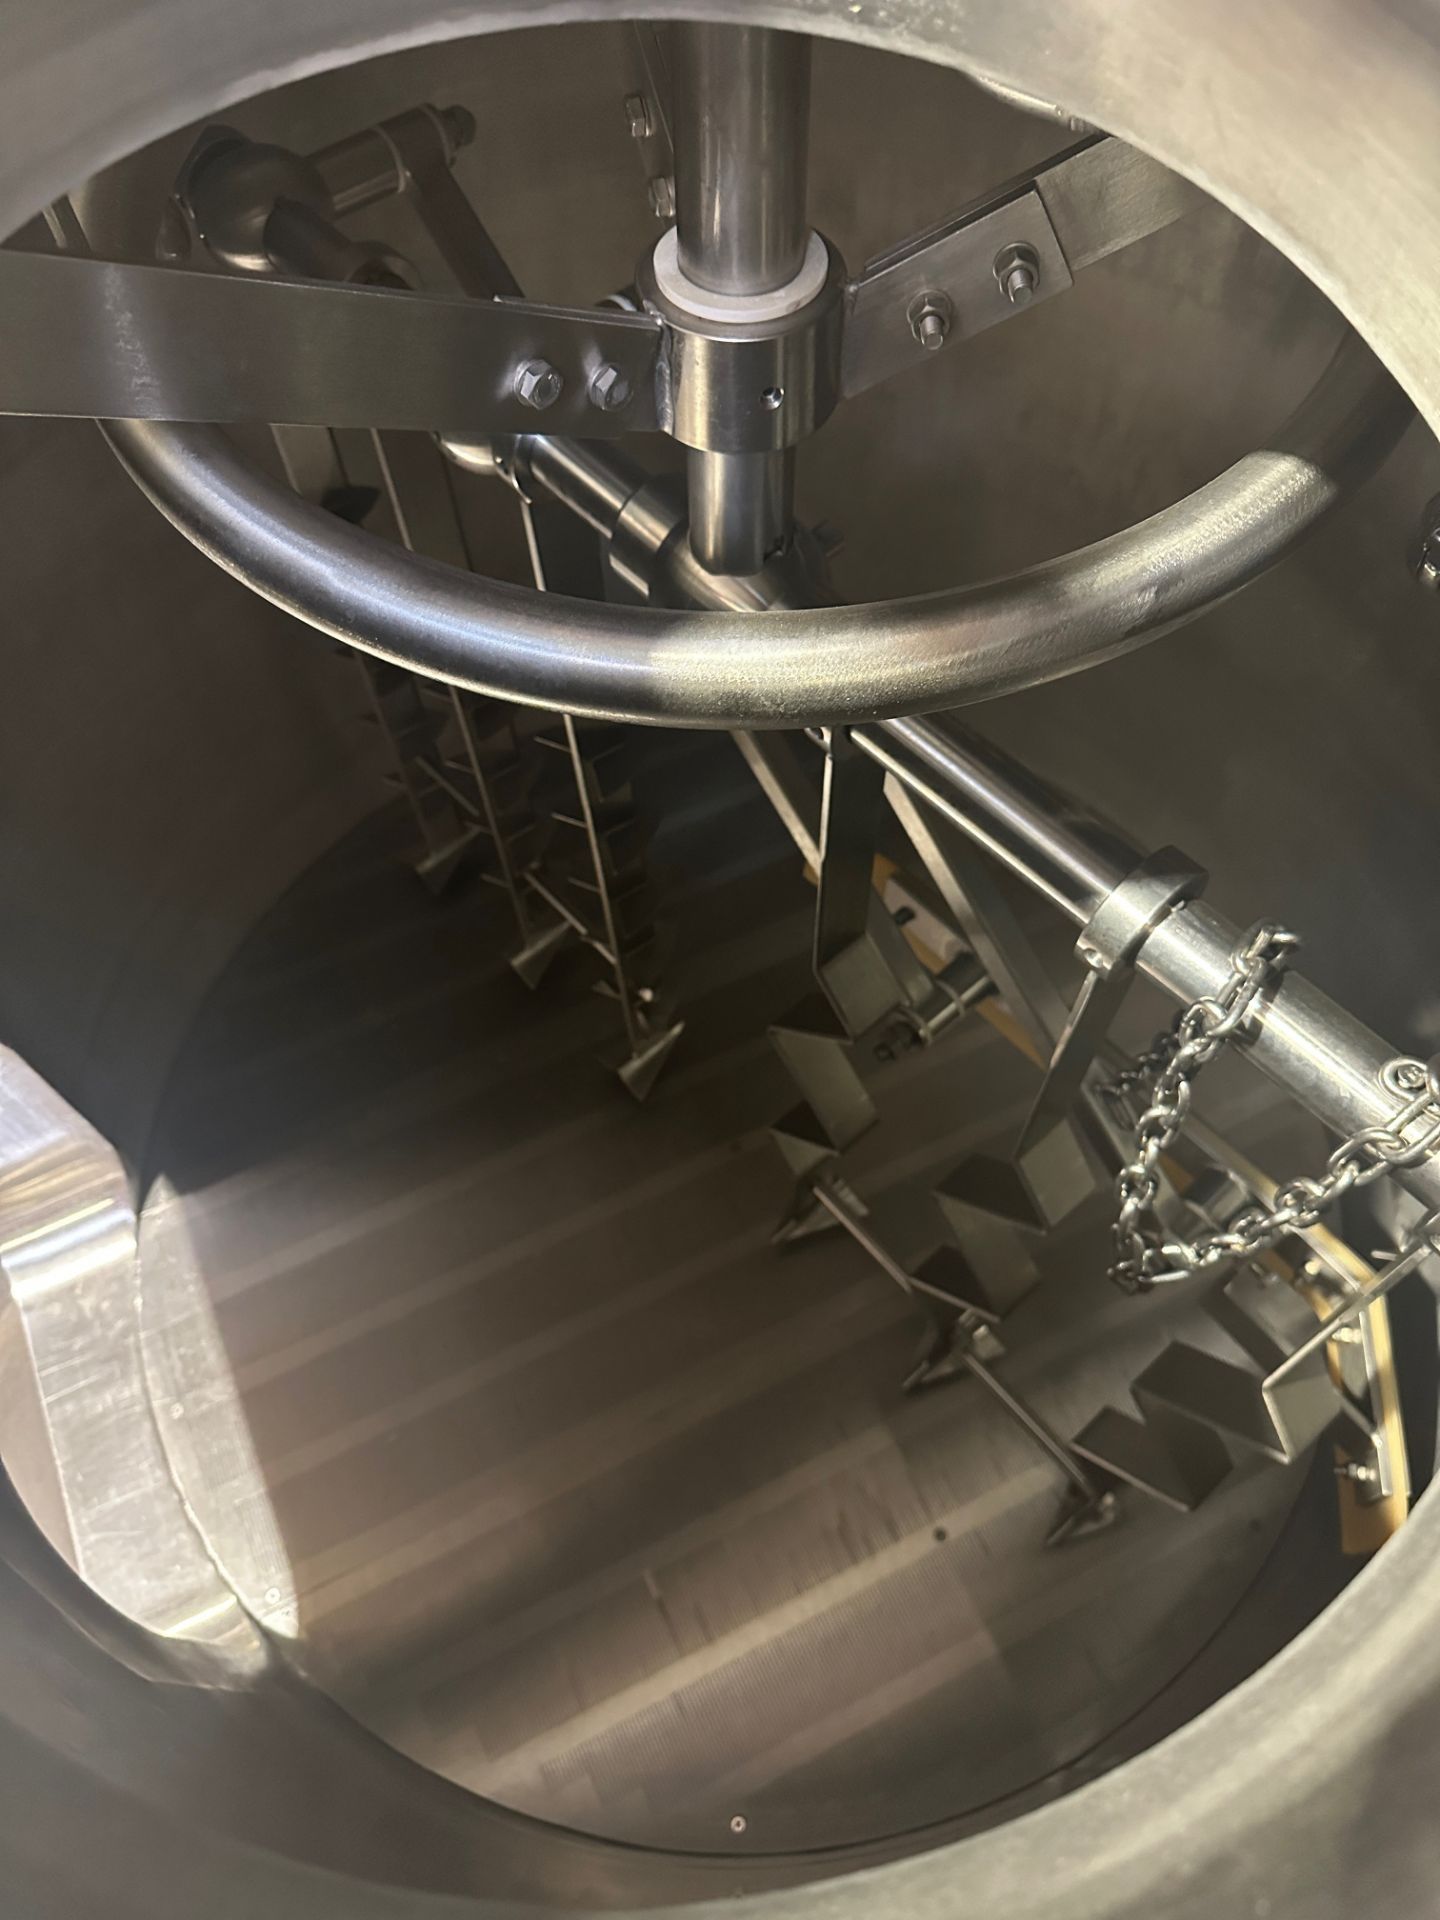 2019 ABS 10 BBL 2-Vessel Brewhouse with Grist Case - Mash/Lauter Tun (Approx. 5' Di | Rig Fee $4500 - Image 5 of 24